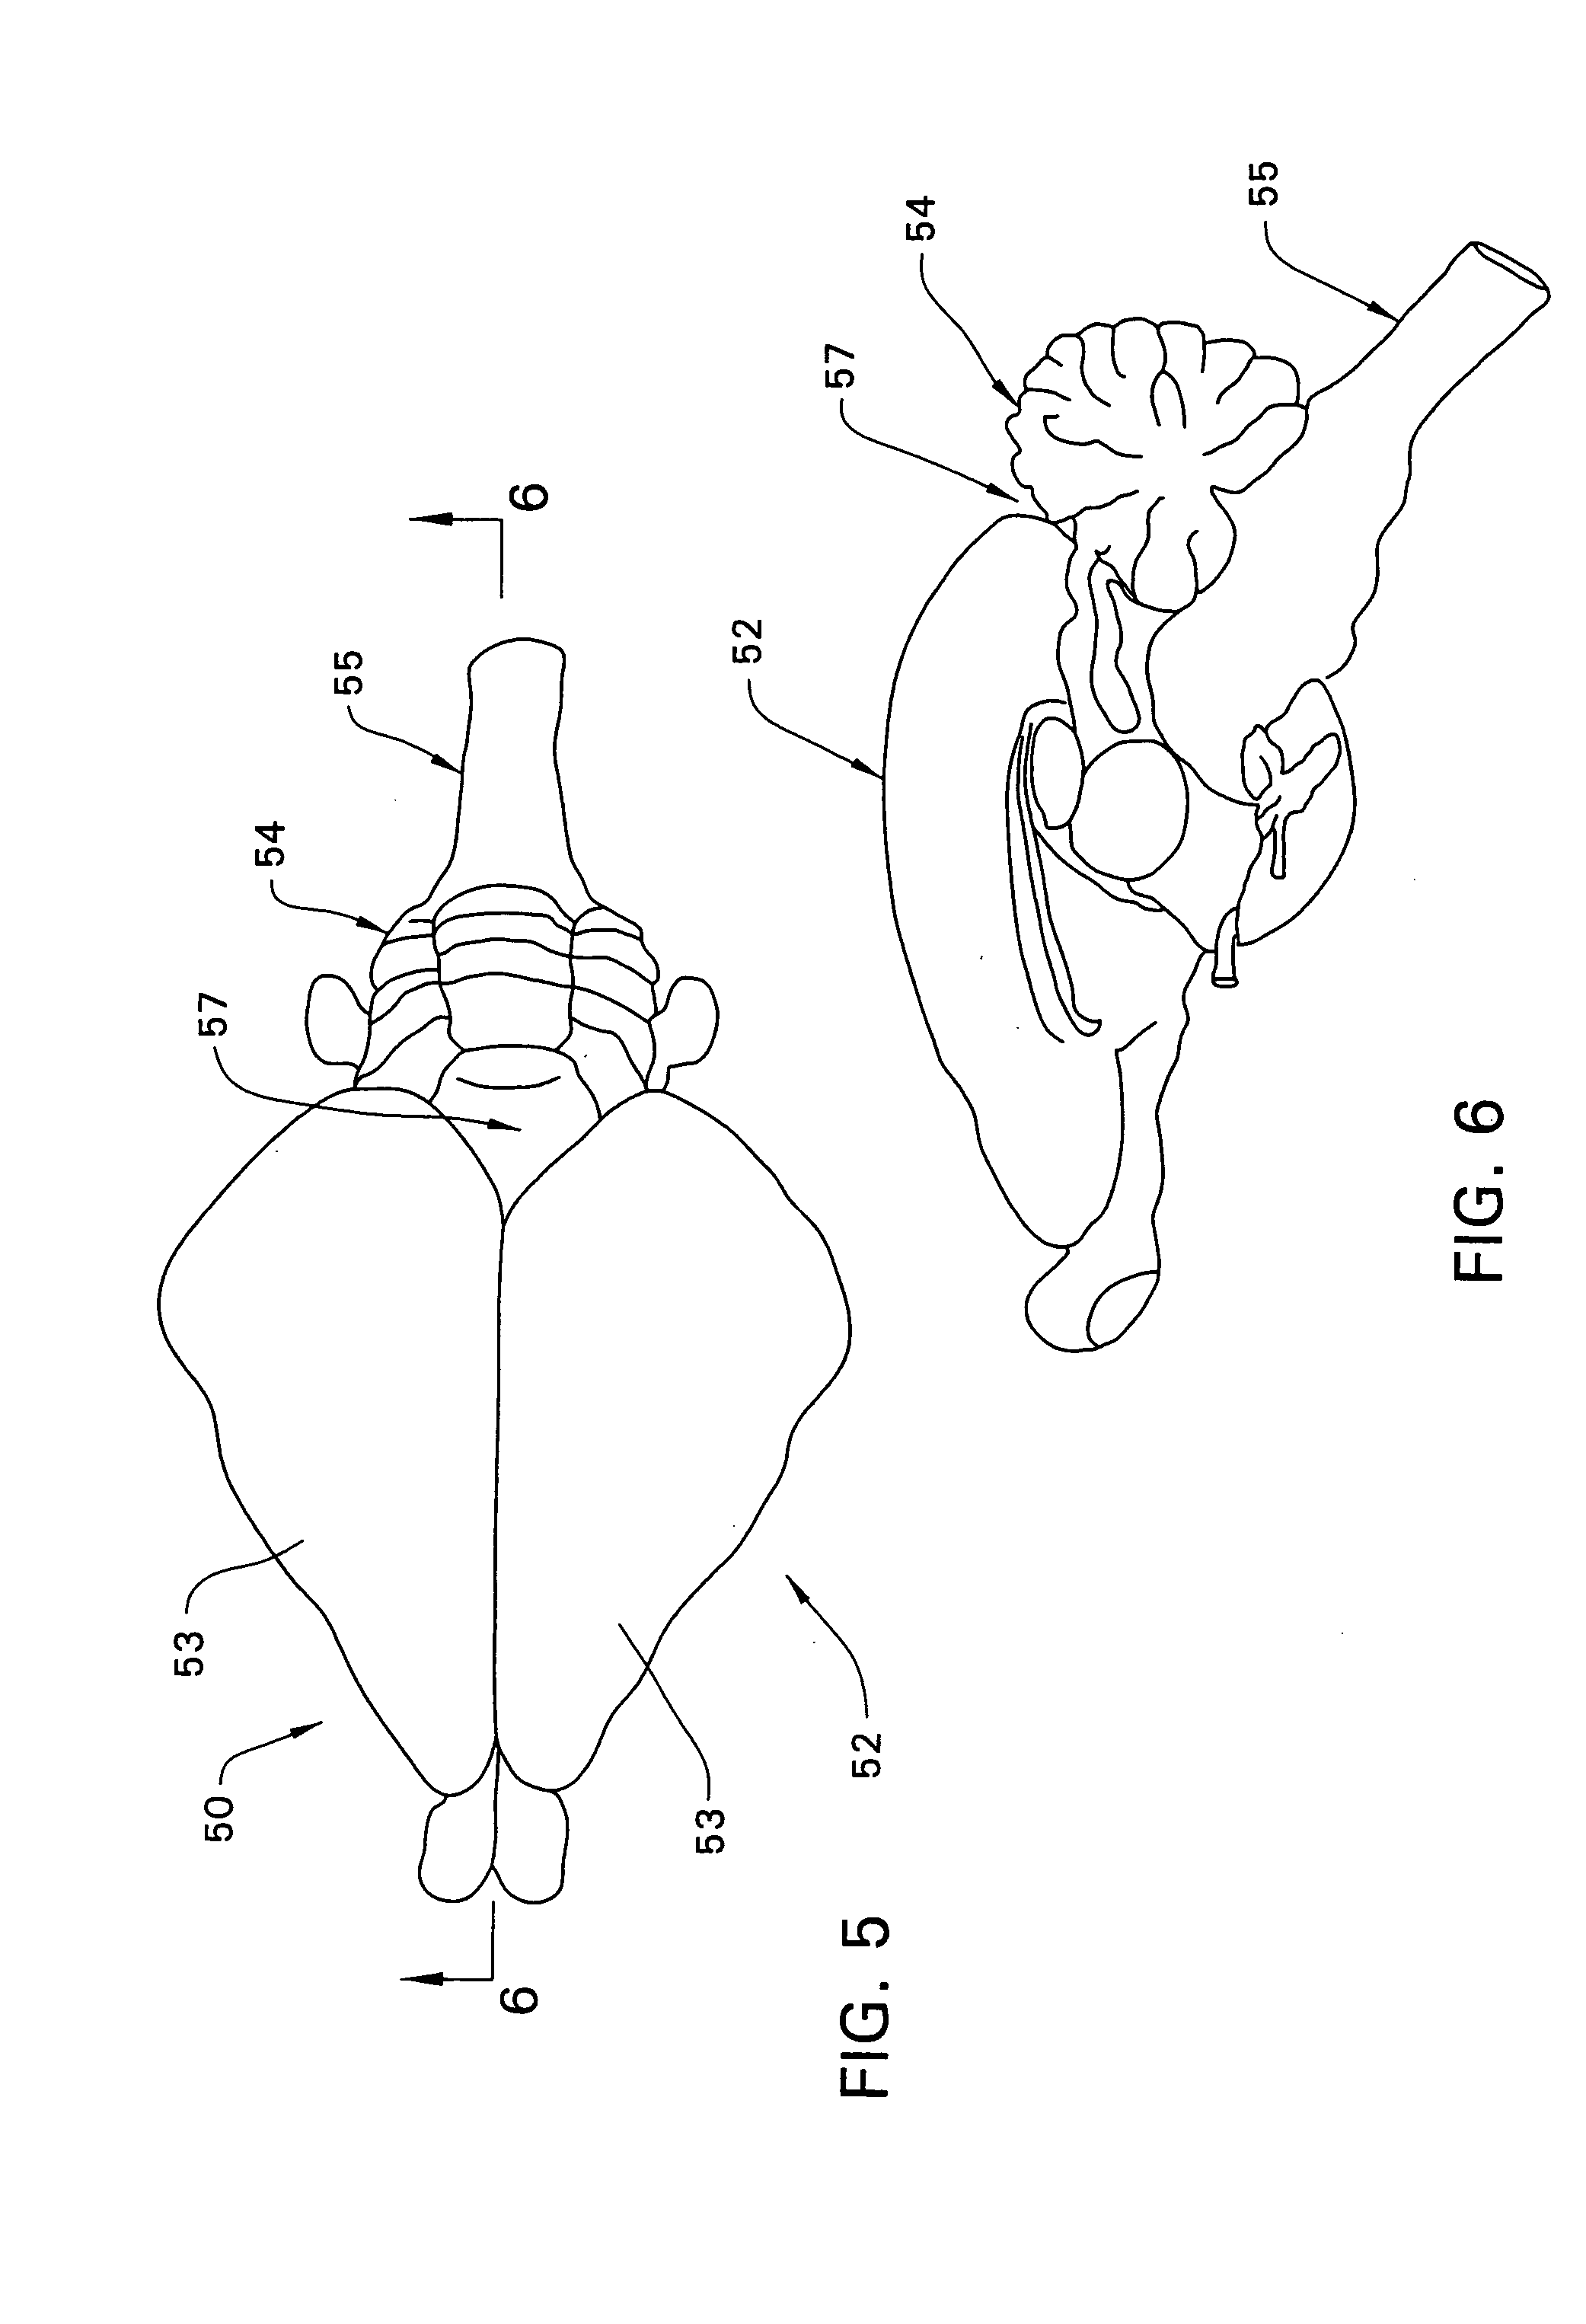 Surgical implant and method of accessing cerebrospinal fluid